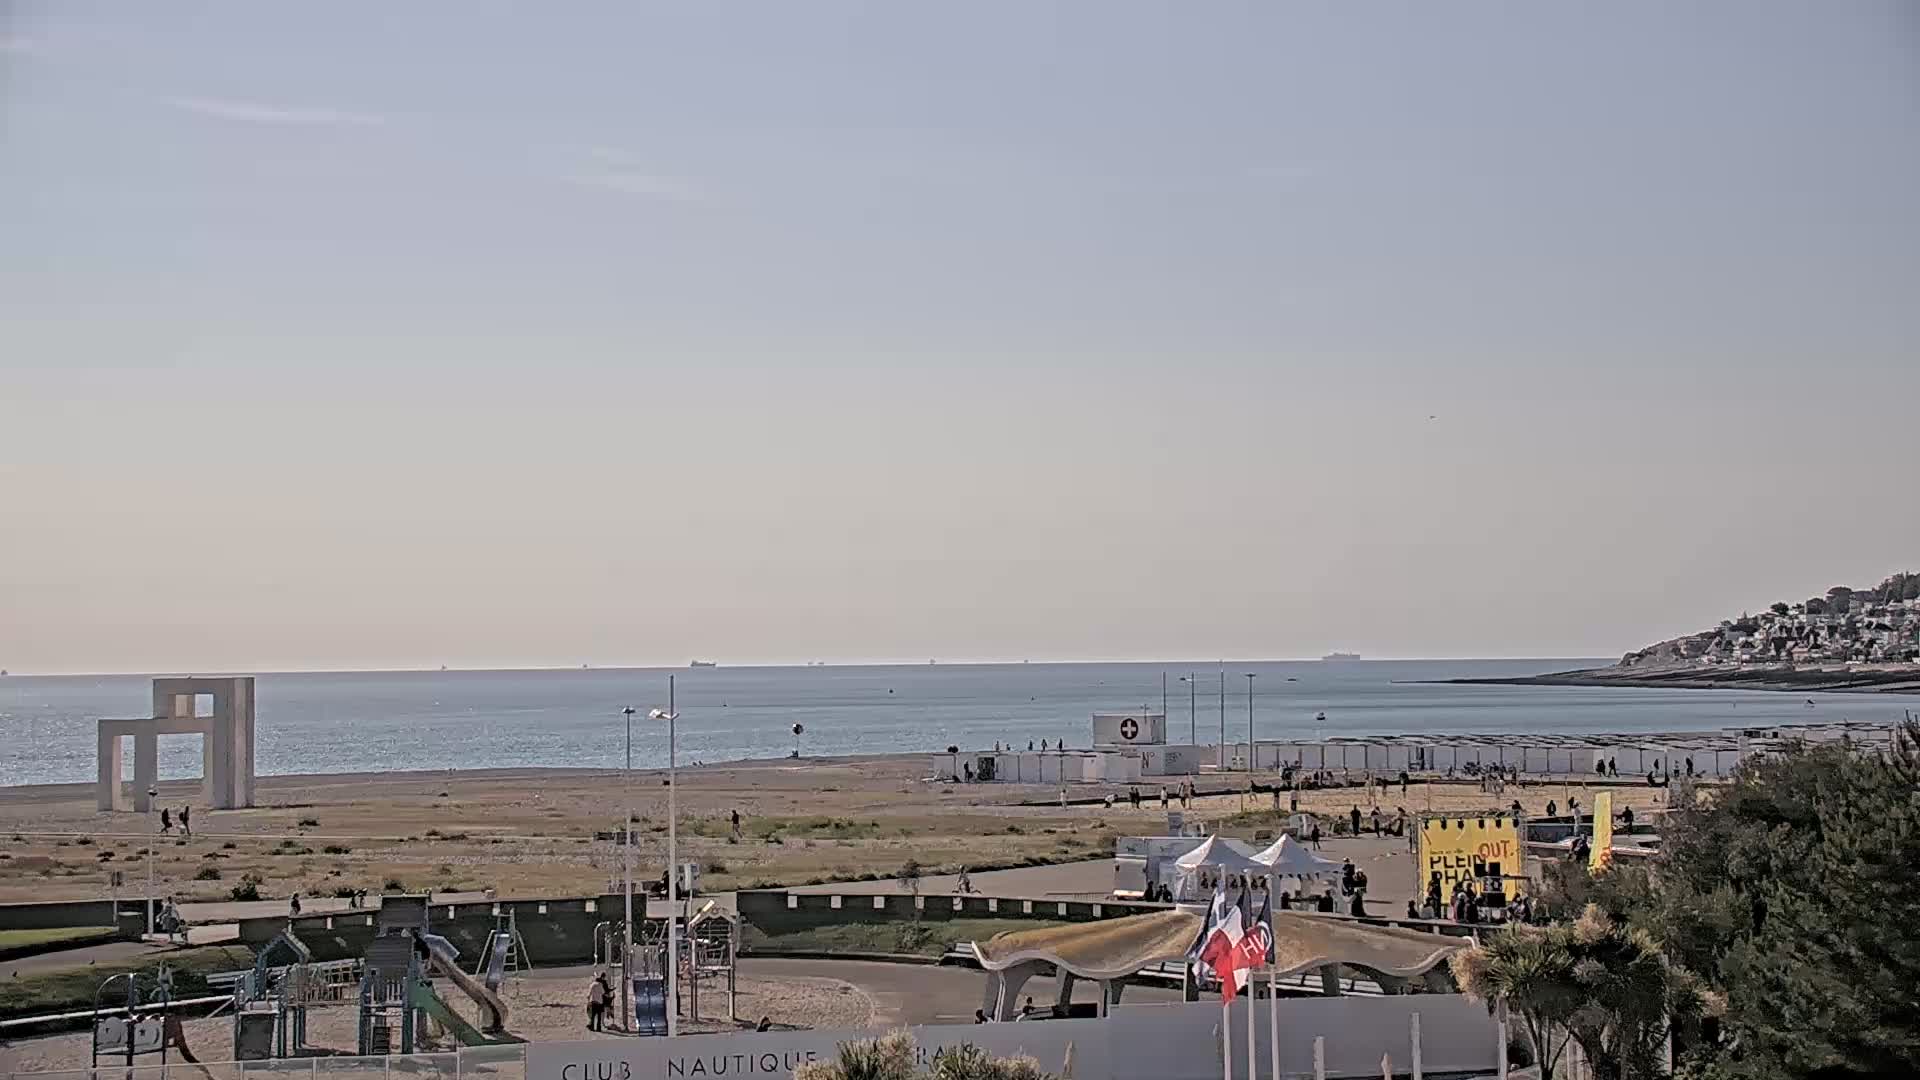 Le Havre Do. 18:34